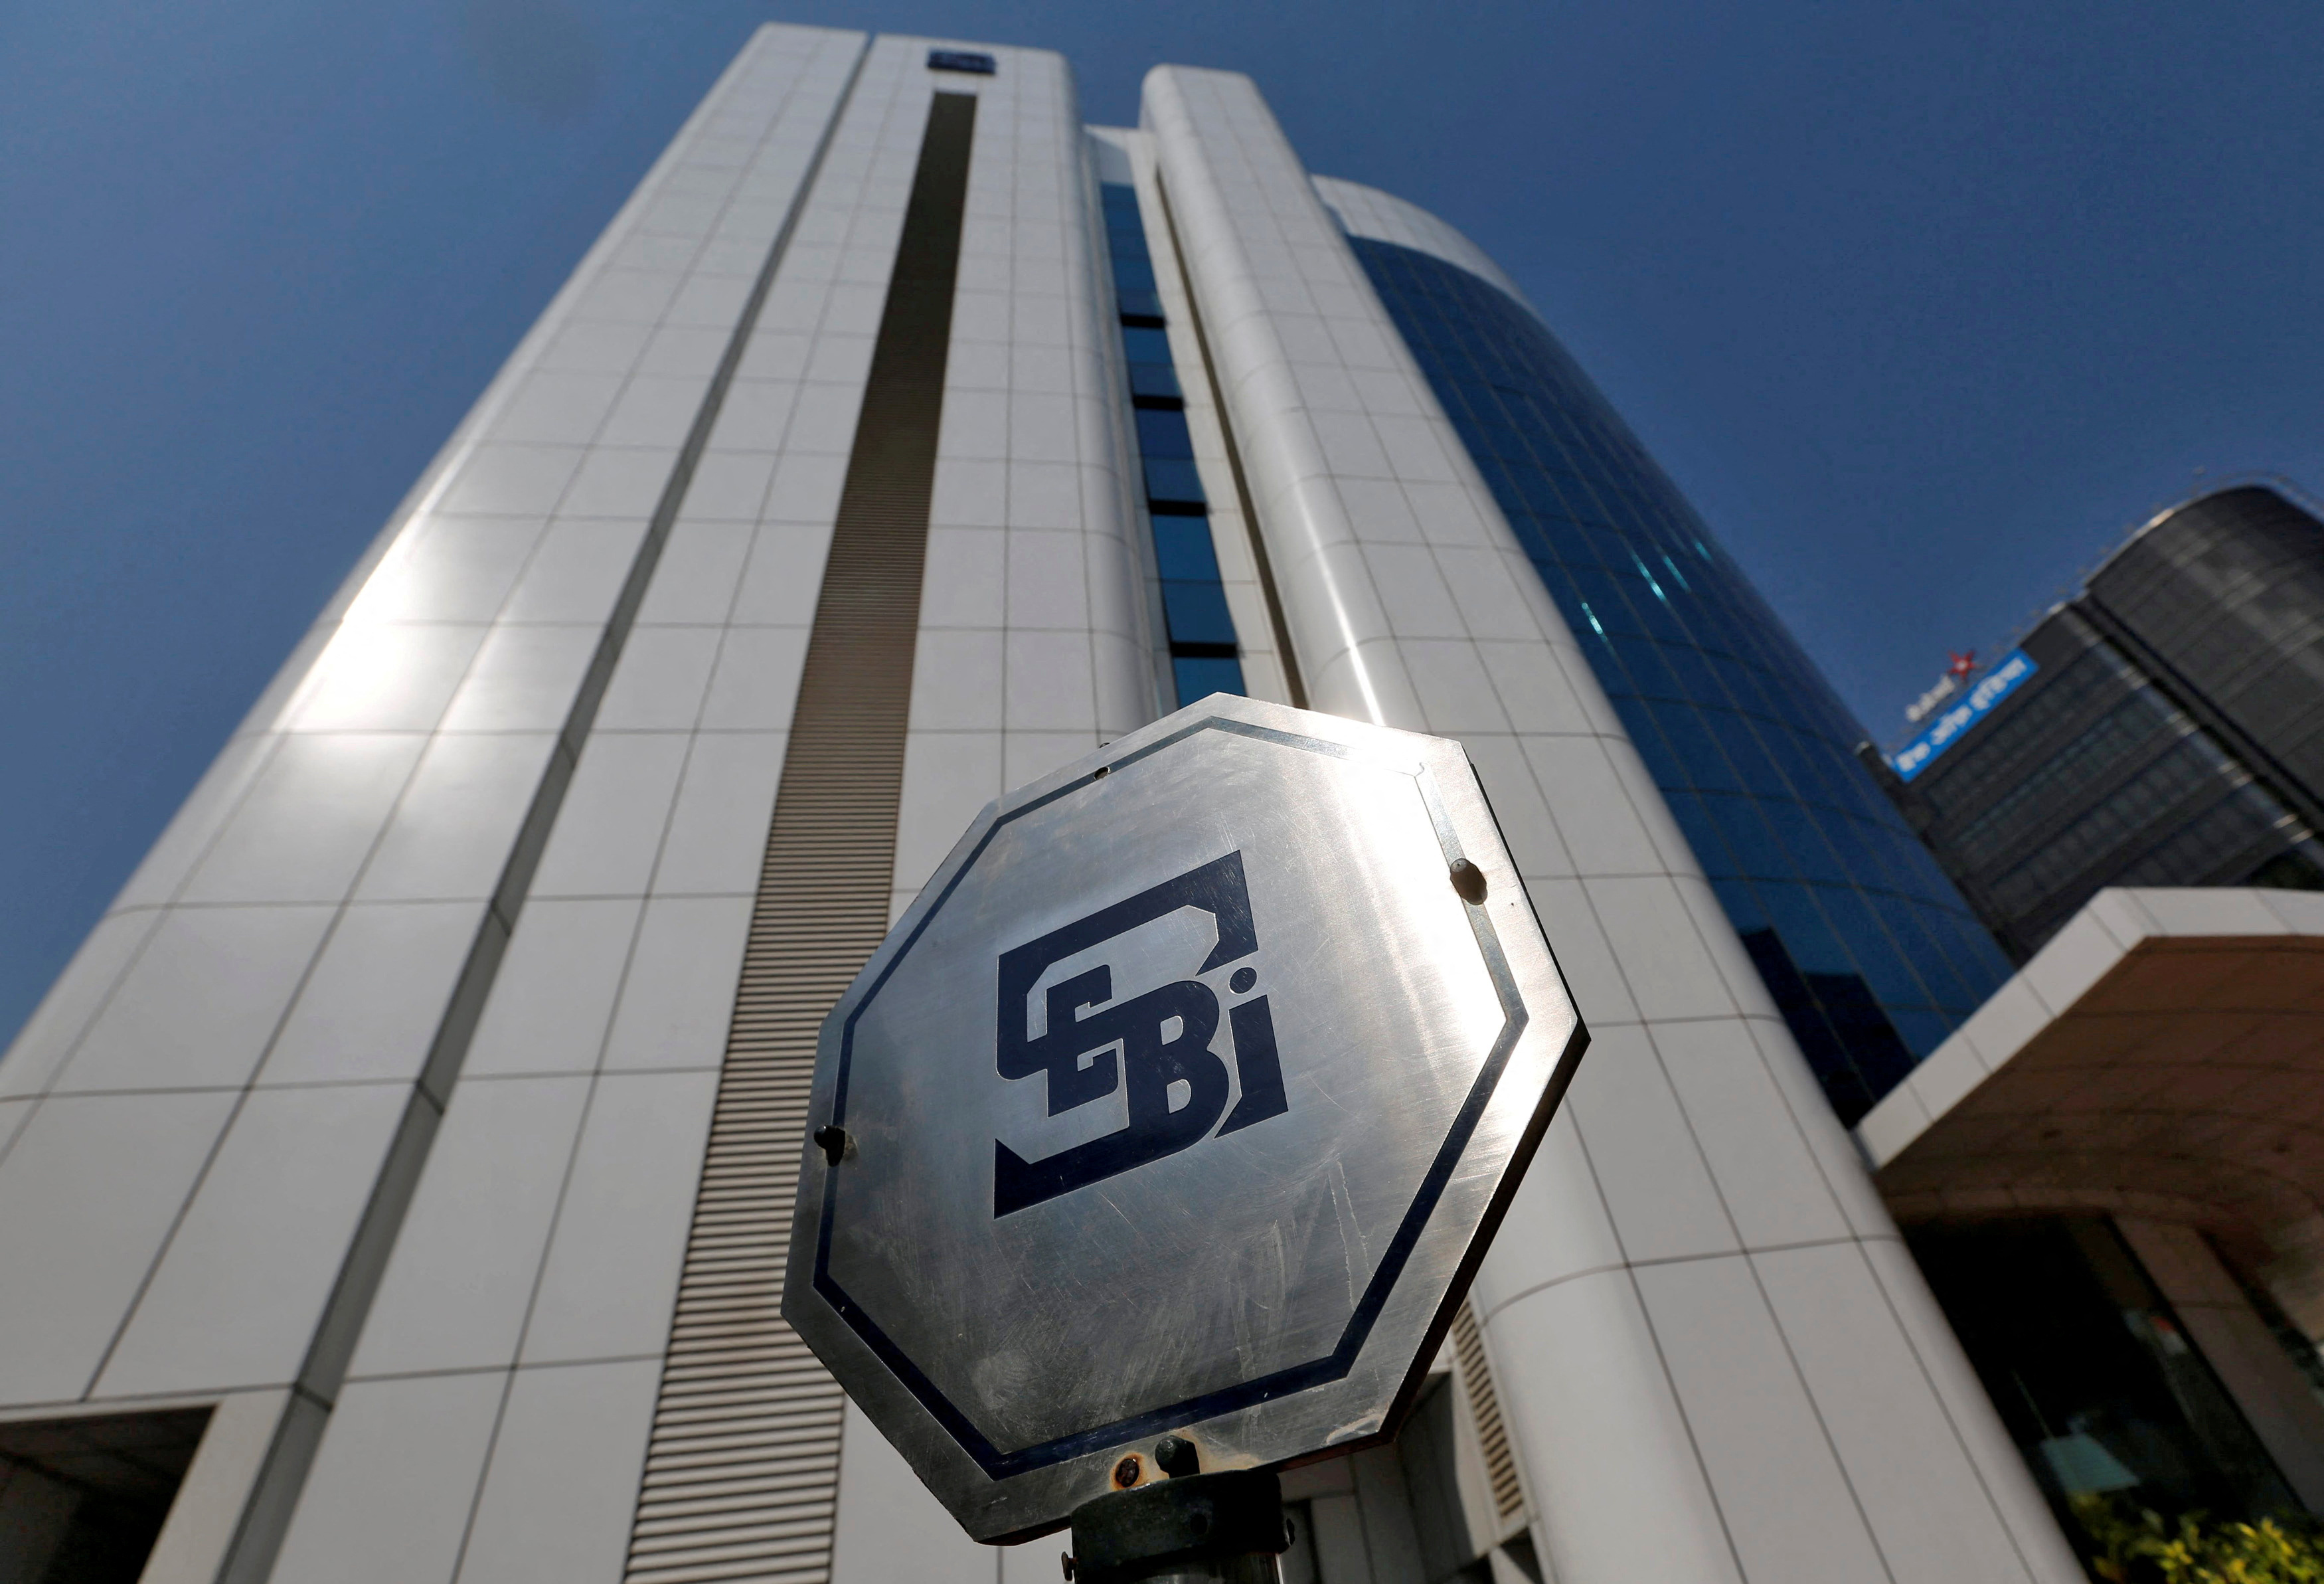 The logo of the Securities and Exchange Board of India (SEBI) at its headquarters in Mumbai